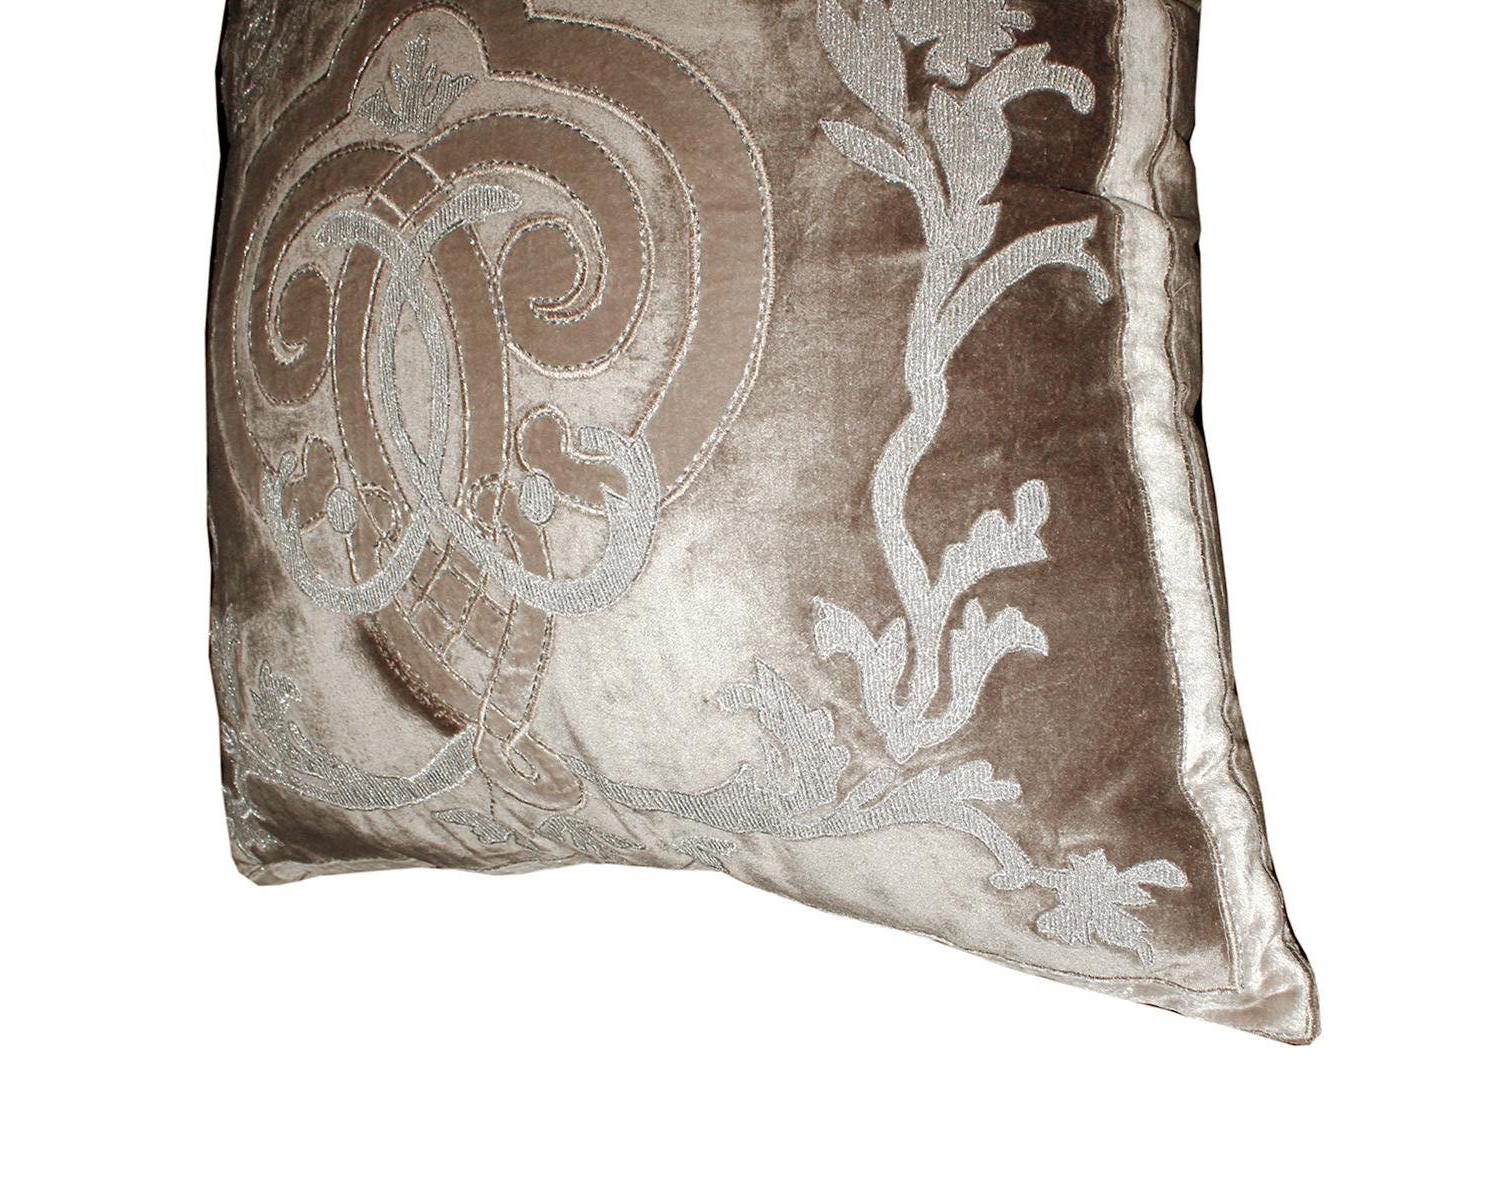 Fer forge taupe velvet throw pillow appliqué and embroidery.

Two-tone, light background, dark pattern

Insert not included

Measures: 21